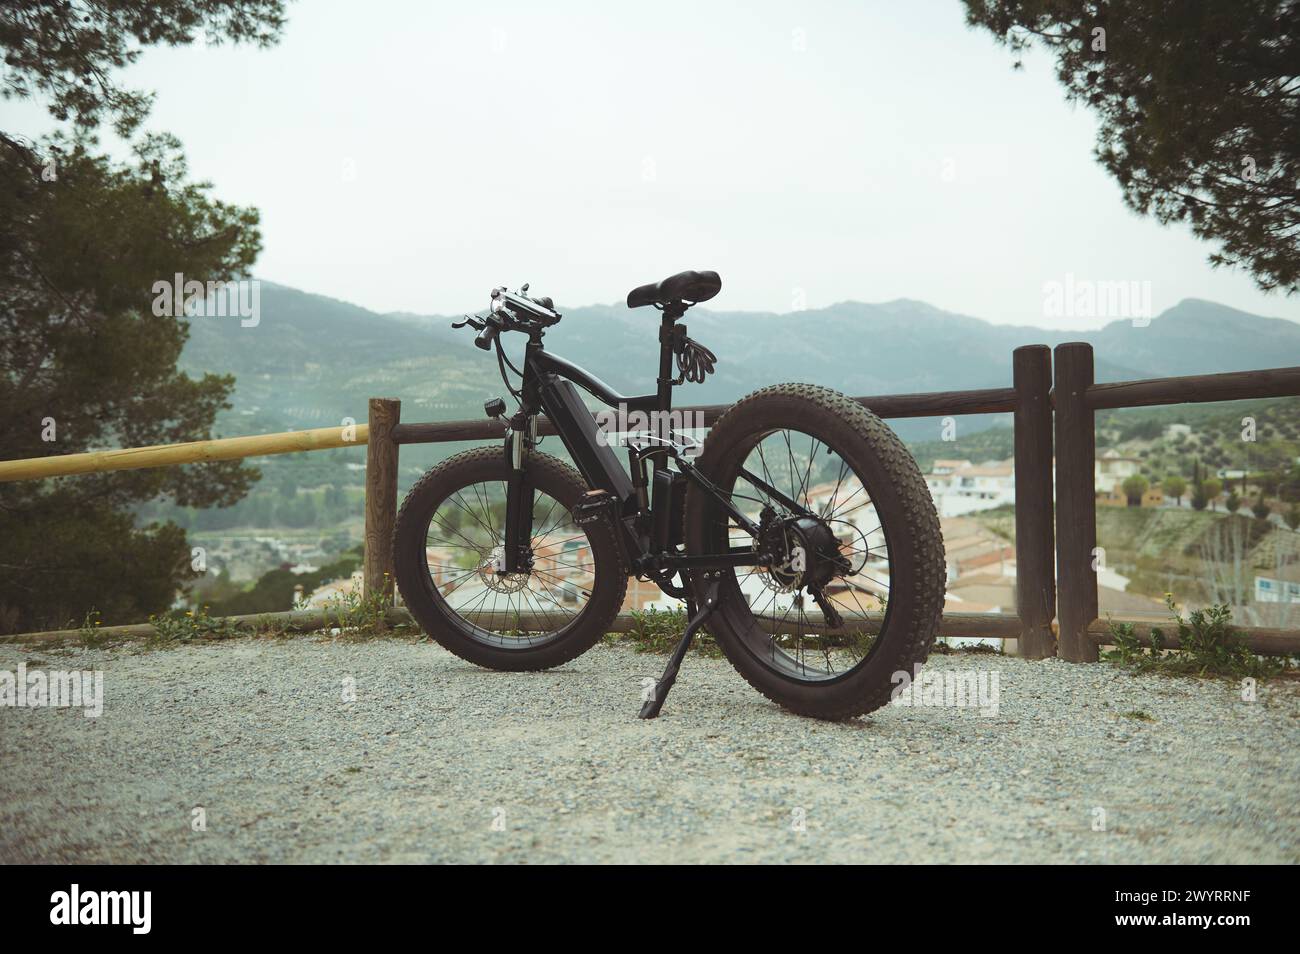 A full size shot of a modern black electric motor bike on the countryside road, parked by a wooden fence, against mountains background in the nature. Stock Photo